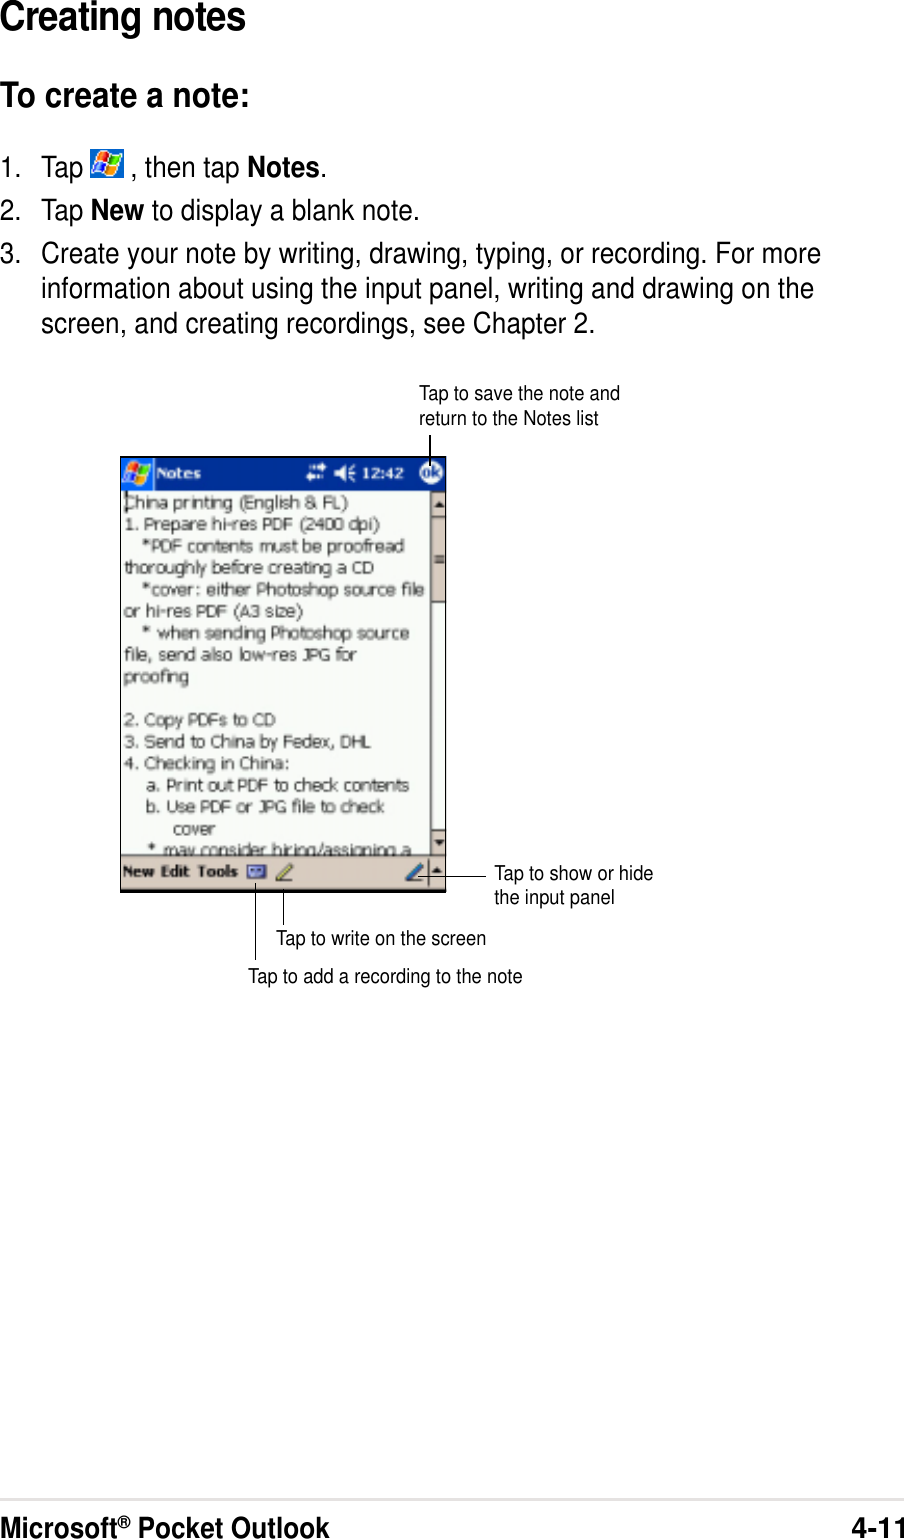 Microsoft® Pocket Outlook4-11Creating notesTo create a note:1. Tap   , then tap Notes.2. Tap New to display a blank note.3. Create your note by writing, drawing, typing, or recording. For moreinformation about using the input panel, writing and drawing on thescreen, and creating recordings, see Chapter 2.Tap to show or hidethe input panelTap to save the note andreturn to the Notes listTap to write on the screenTap to add a recording to the note